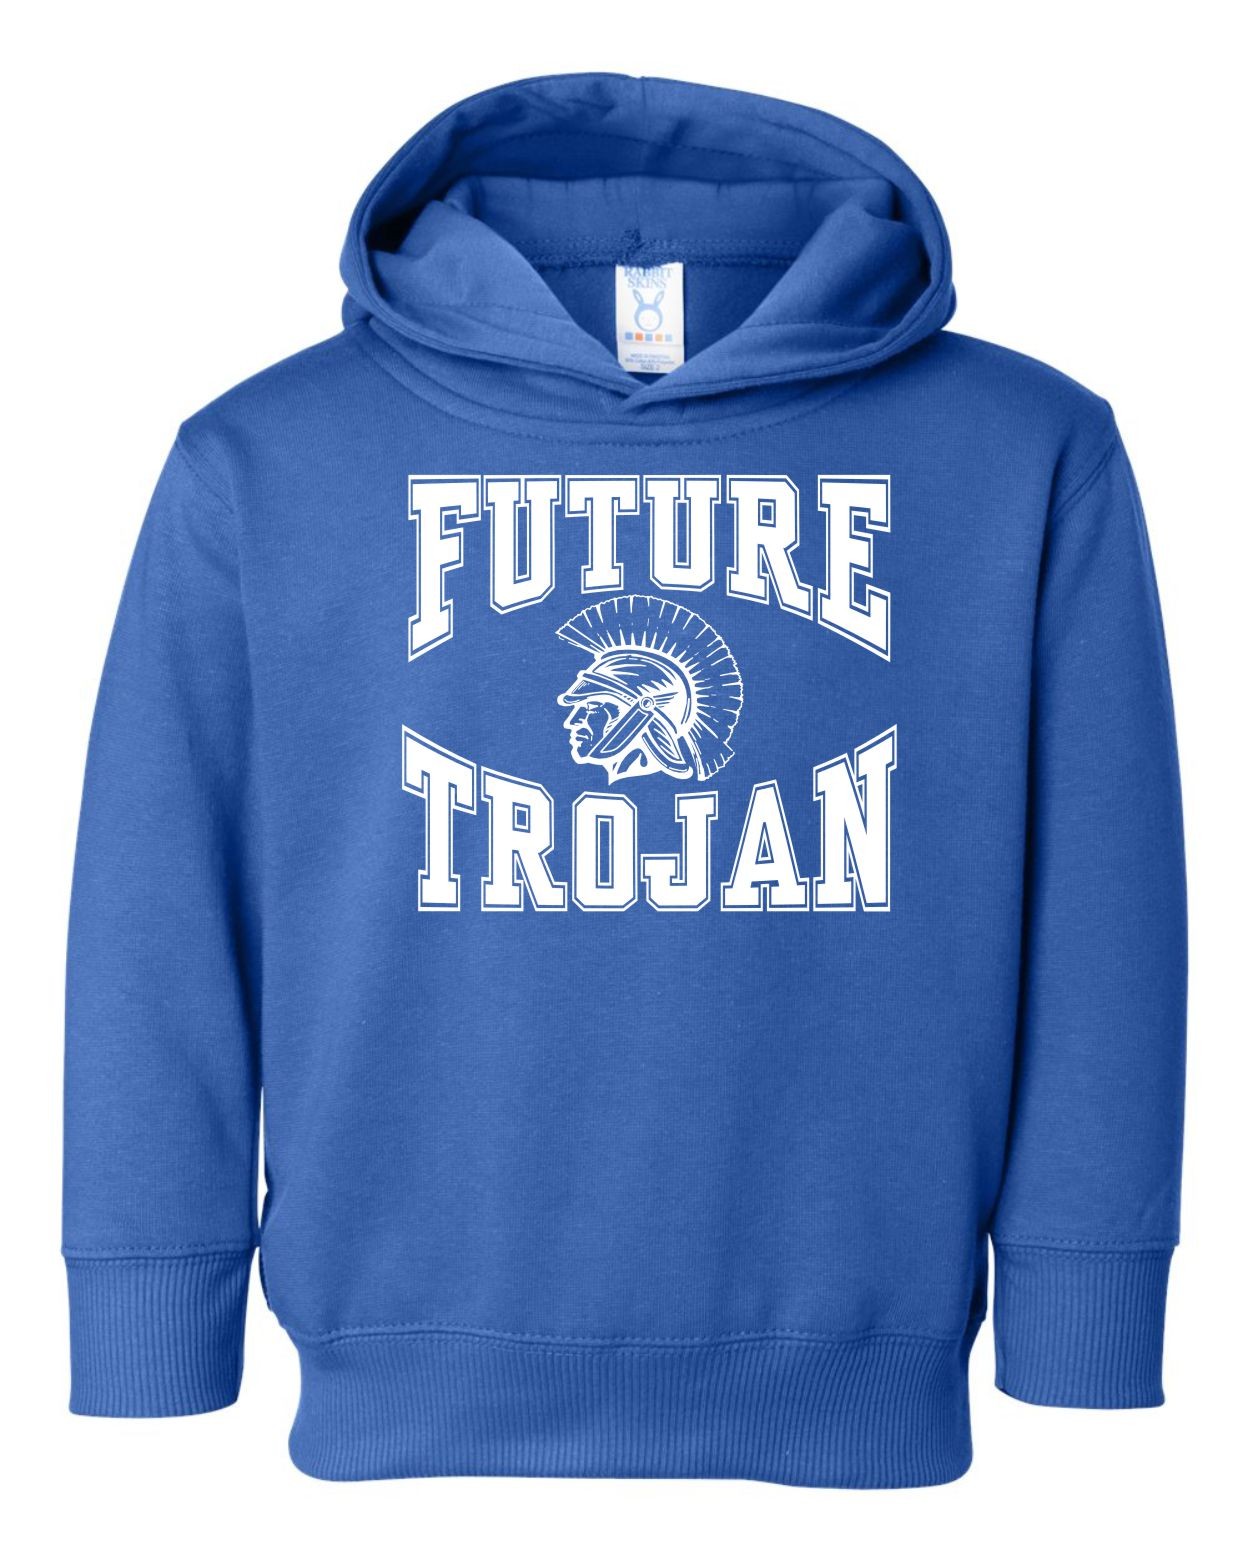 Toddler West Central Future Trojans Hoodie - Royal